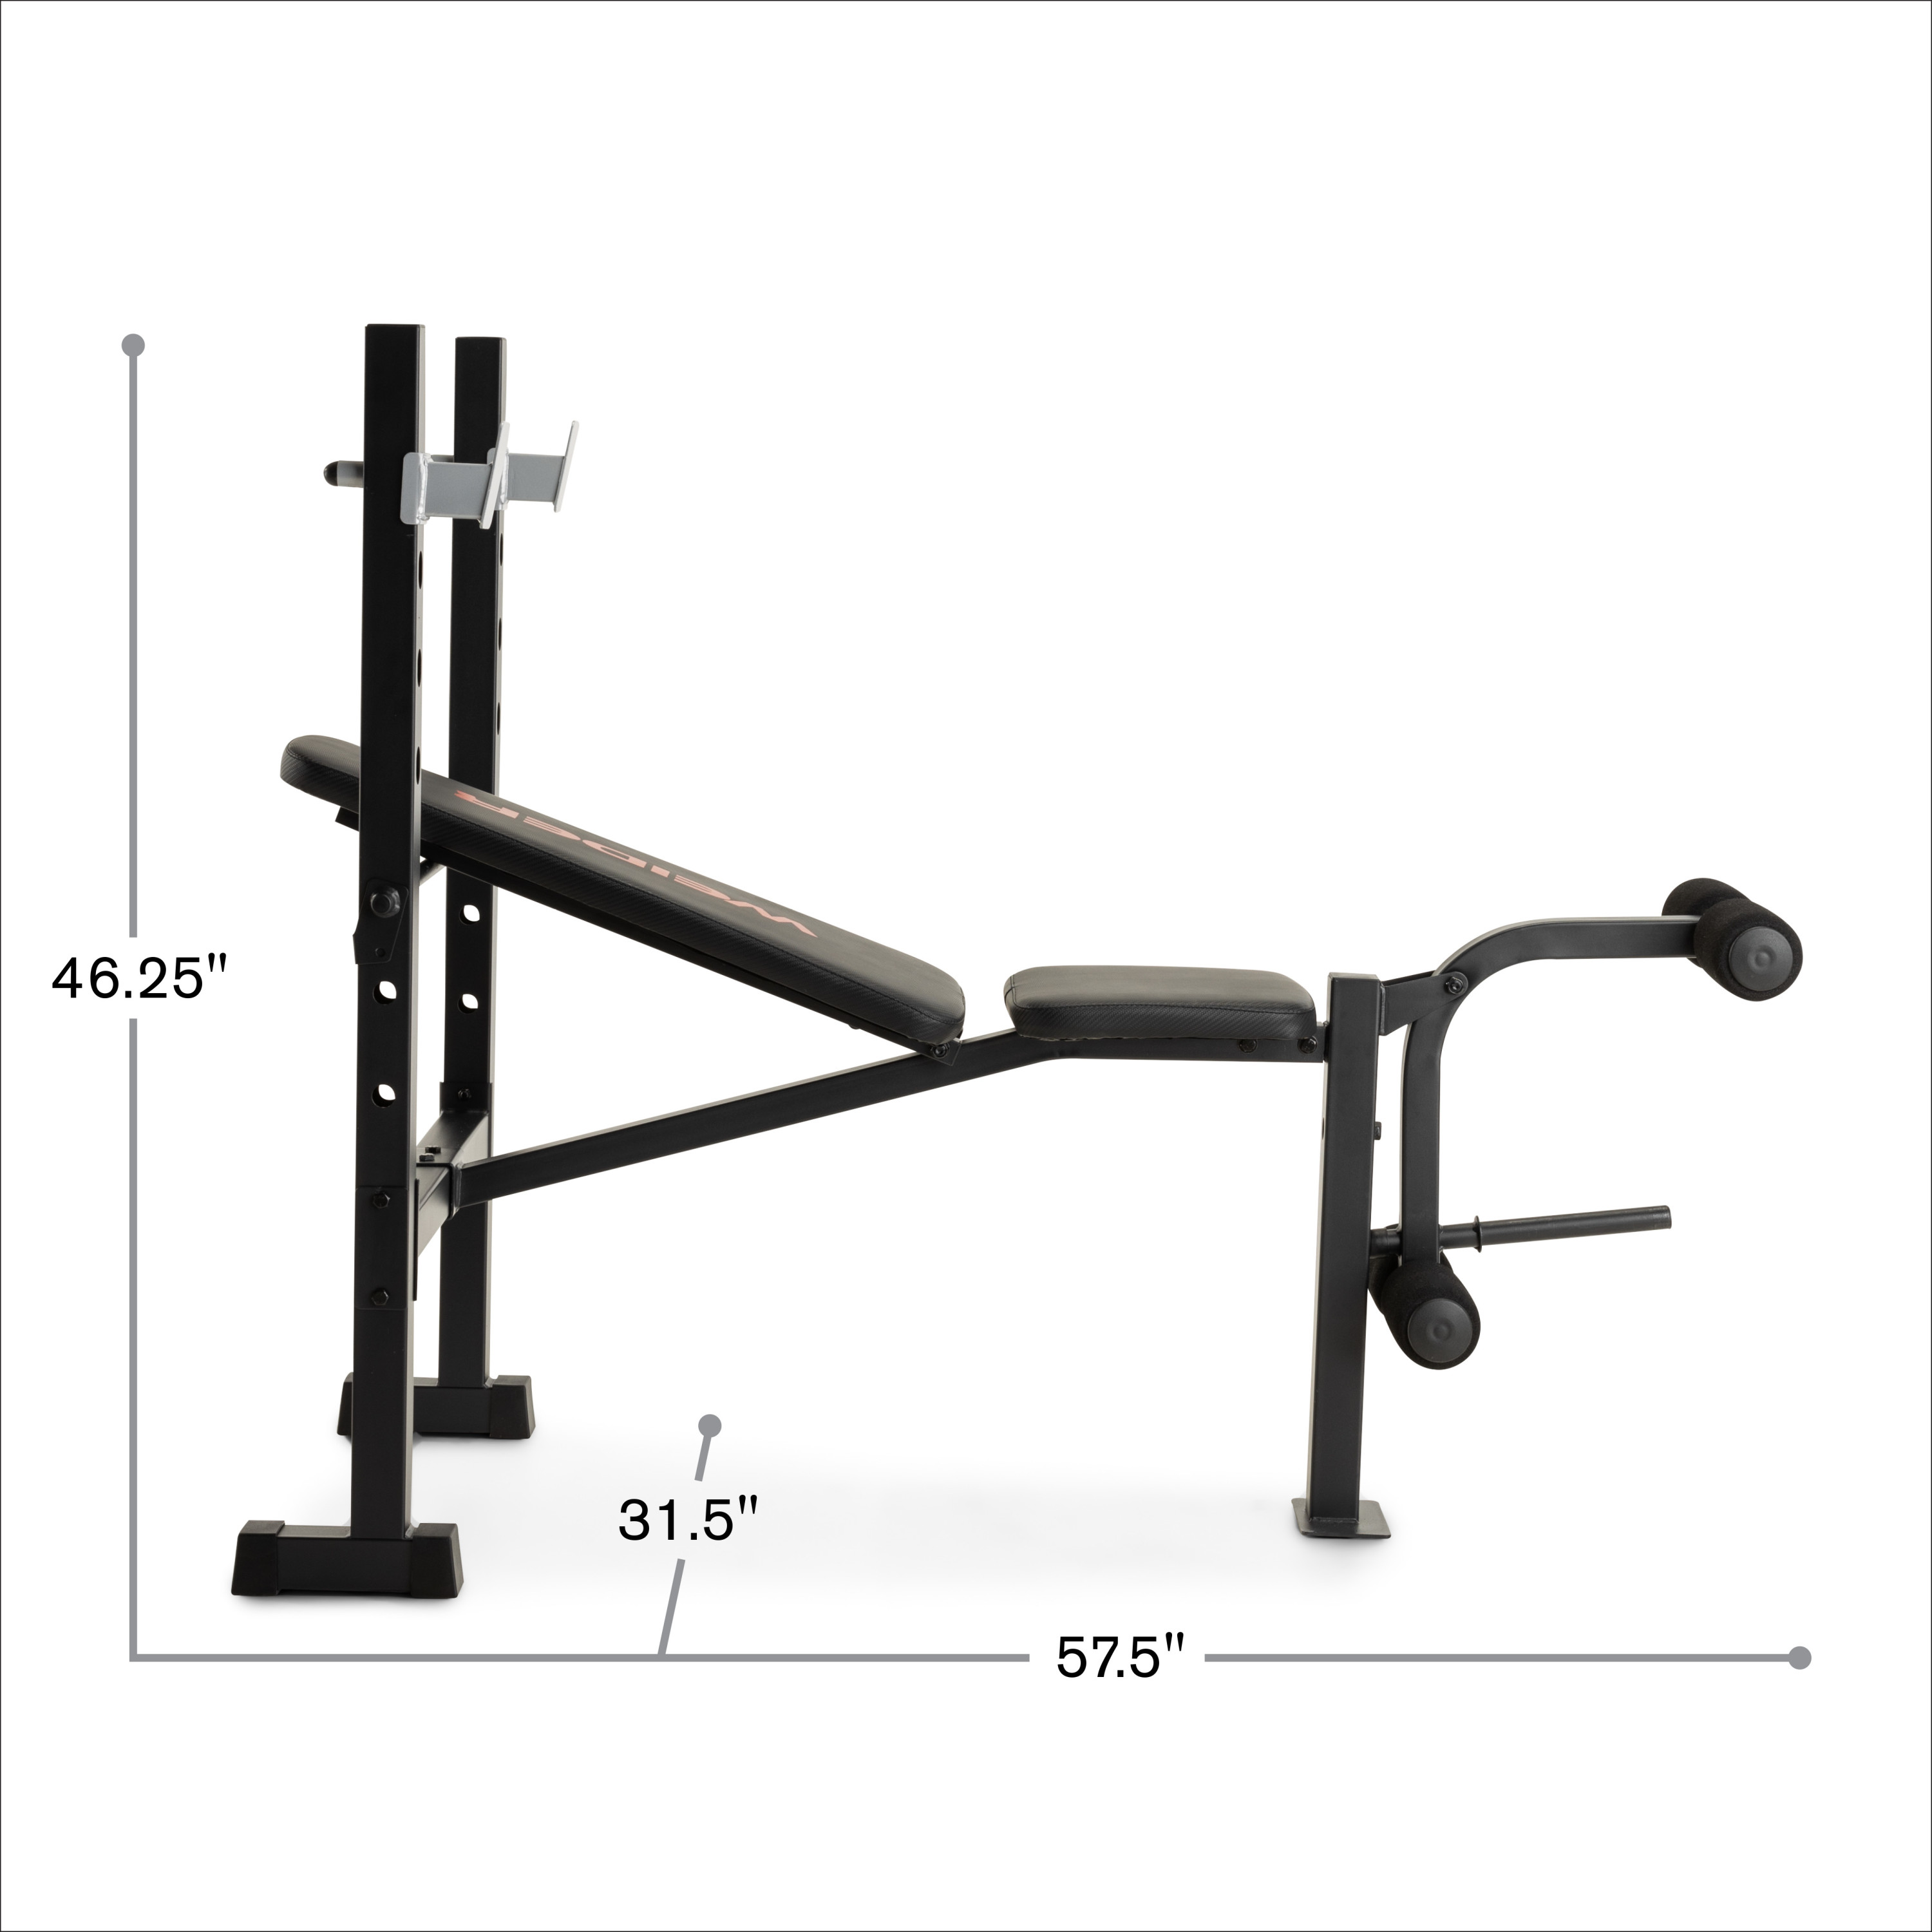 Weider Legacy Standard Bench and Rack, 410 Lb. Total Weight Capacity - image 2 of 23